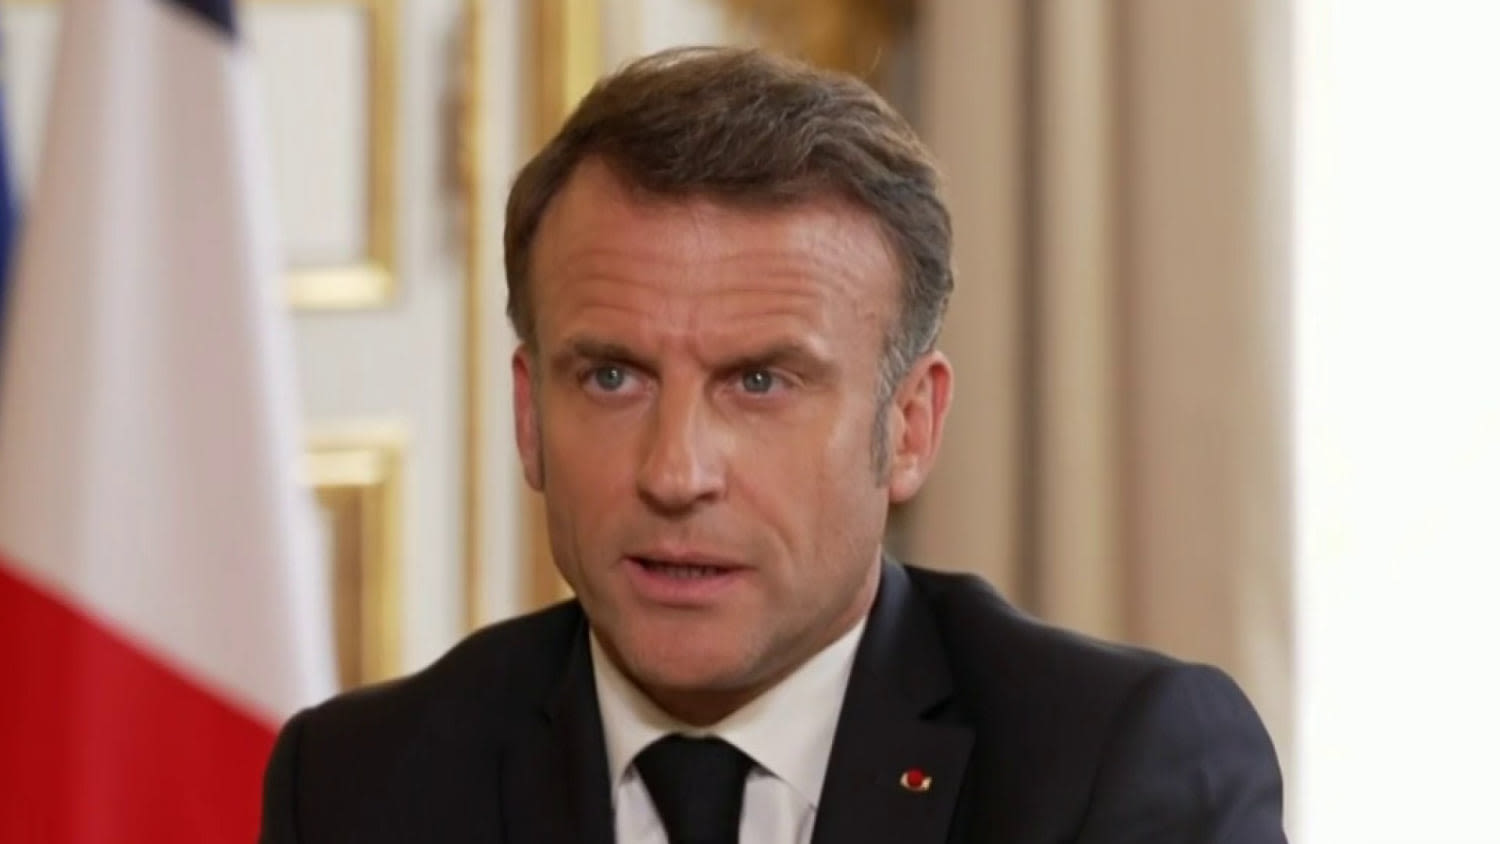 Big mistake if U.S. would choose to leave Paris agreement, says French president